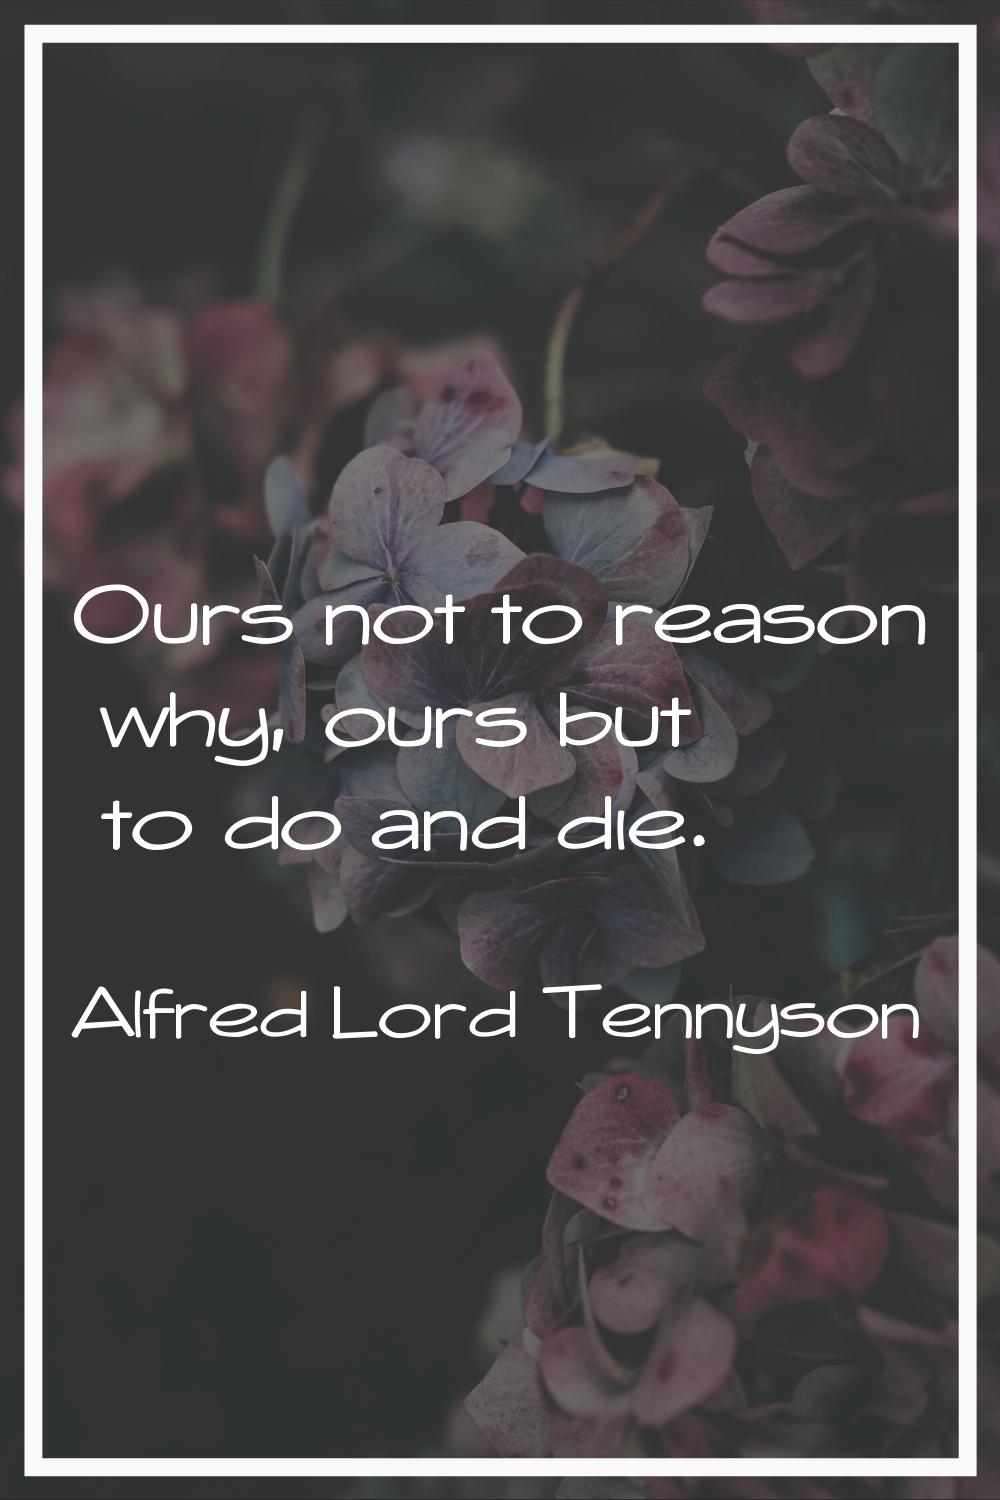 Ours not to reason why, ours but to do and die.